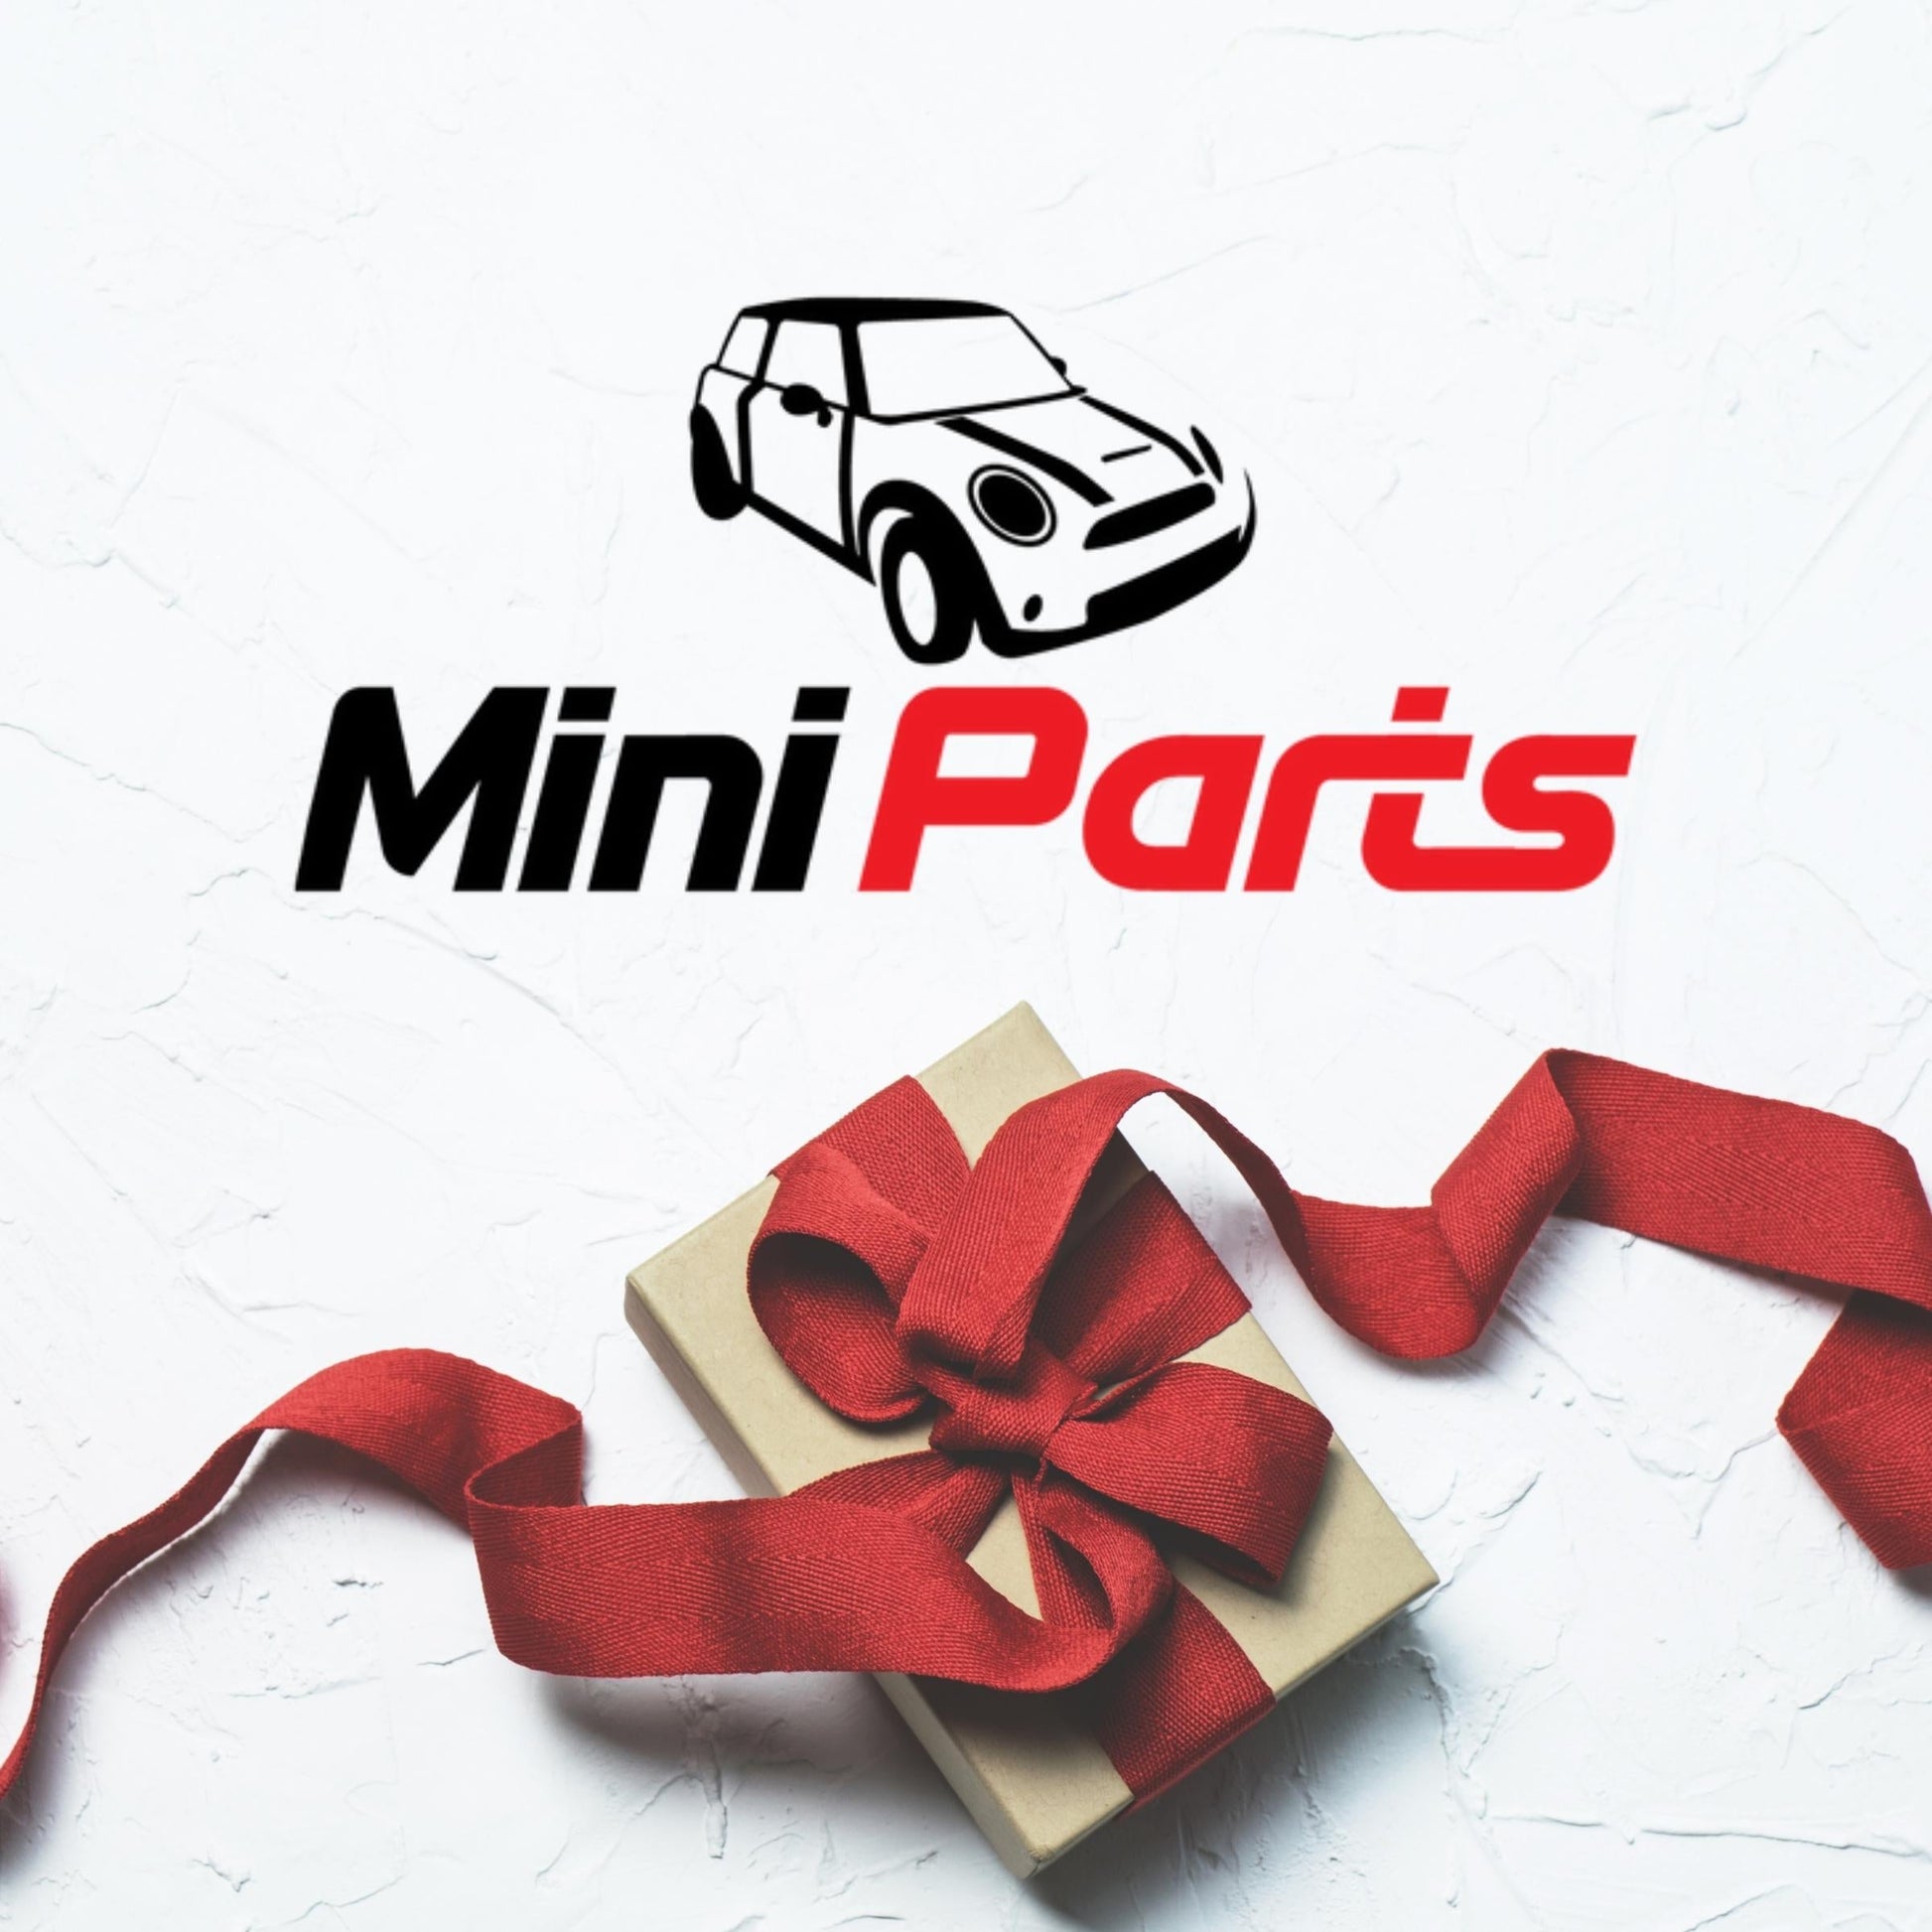 Shopminiparts.com Gift Cards - Premium from Shopminiparts.com - Just €10! Shop now at Shopminiparts.com